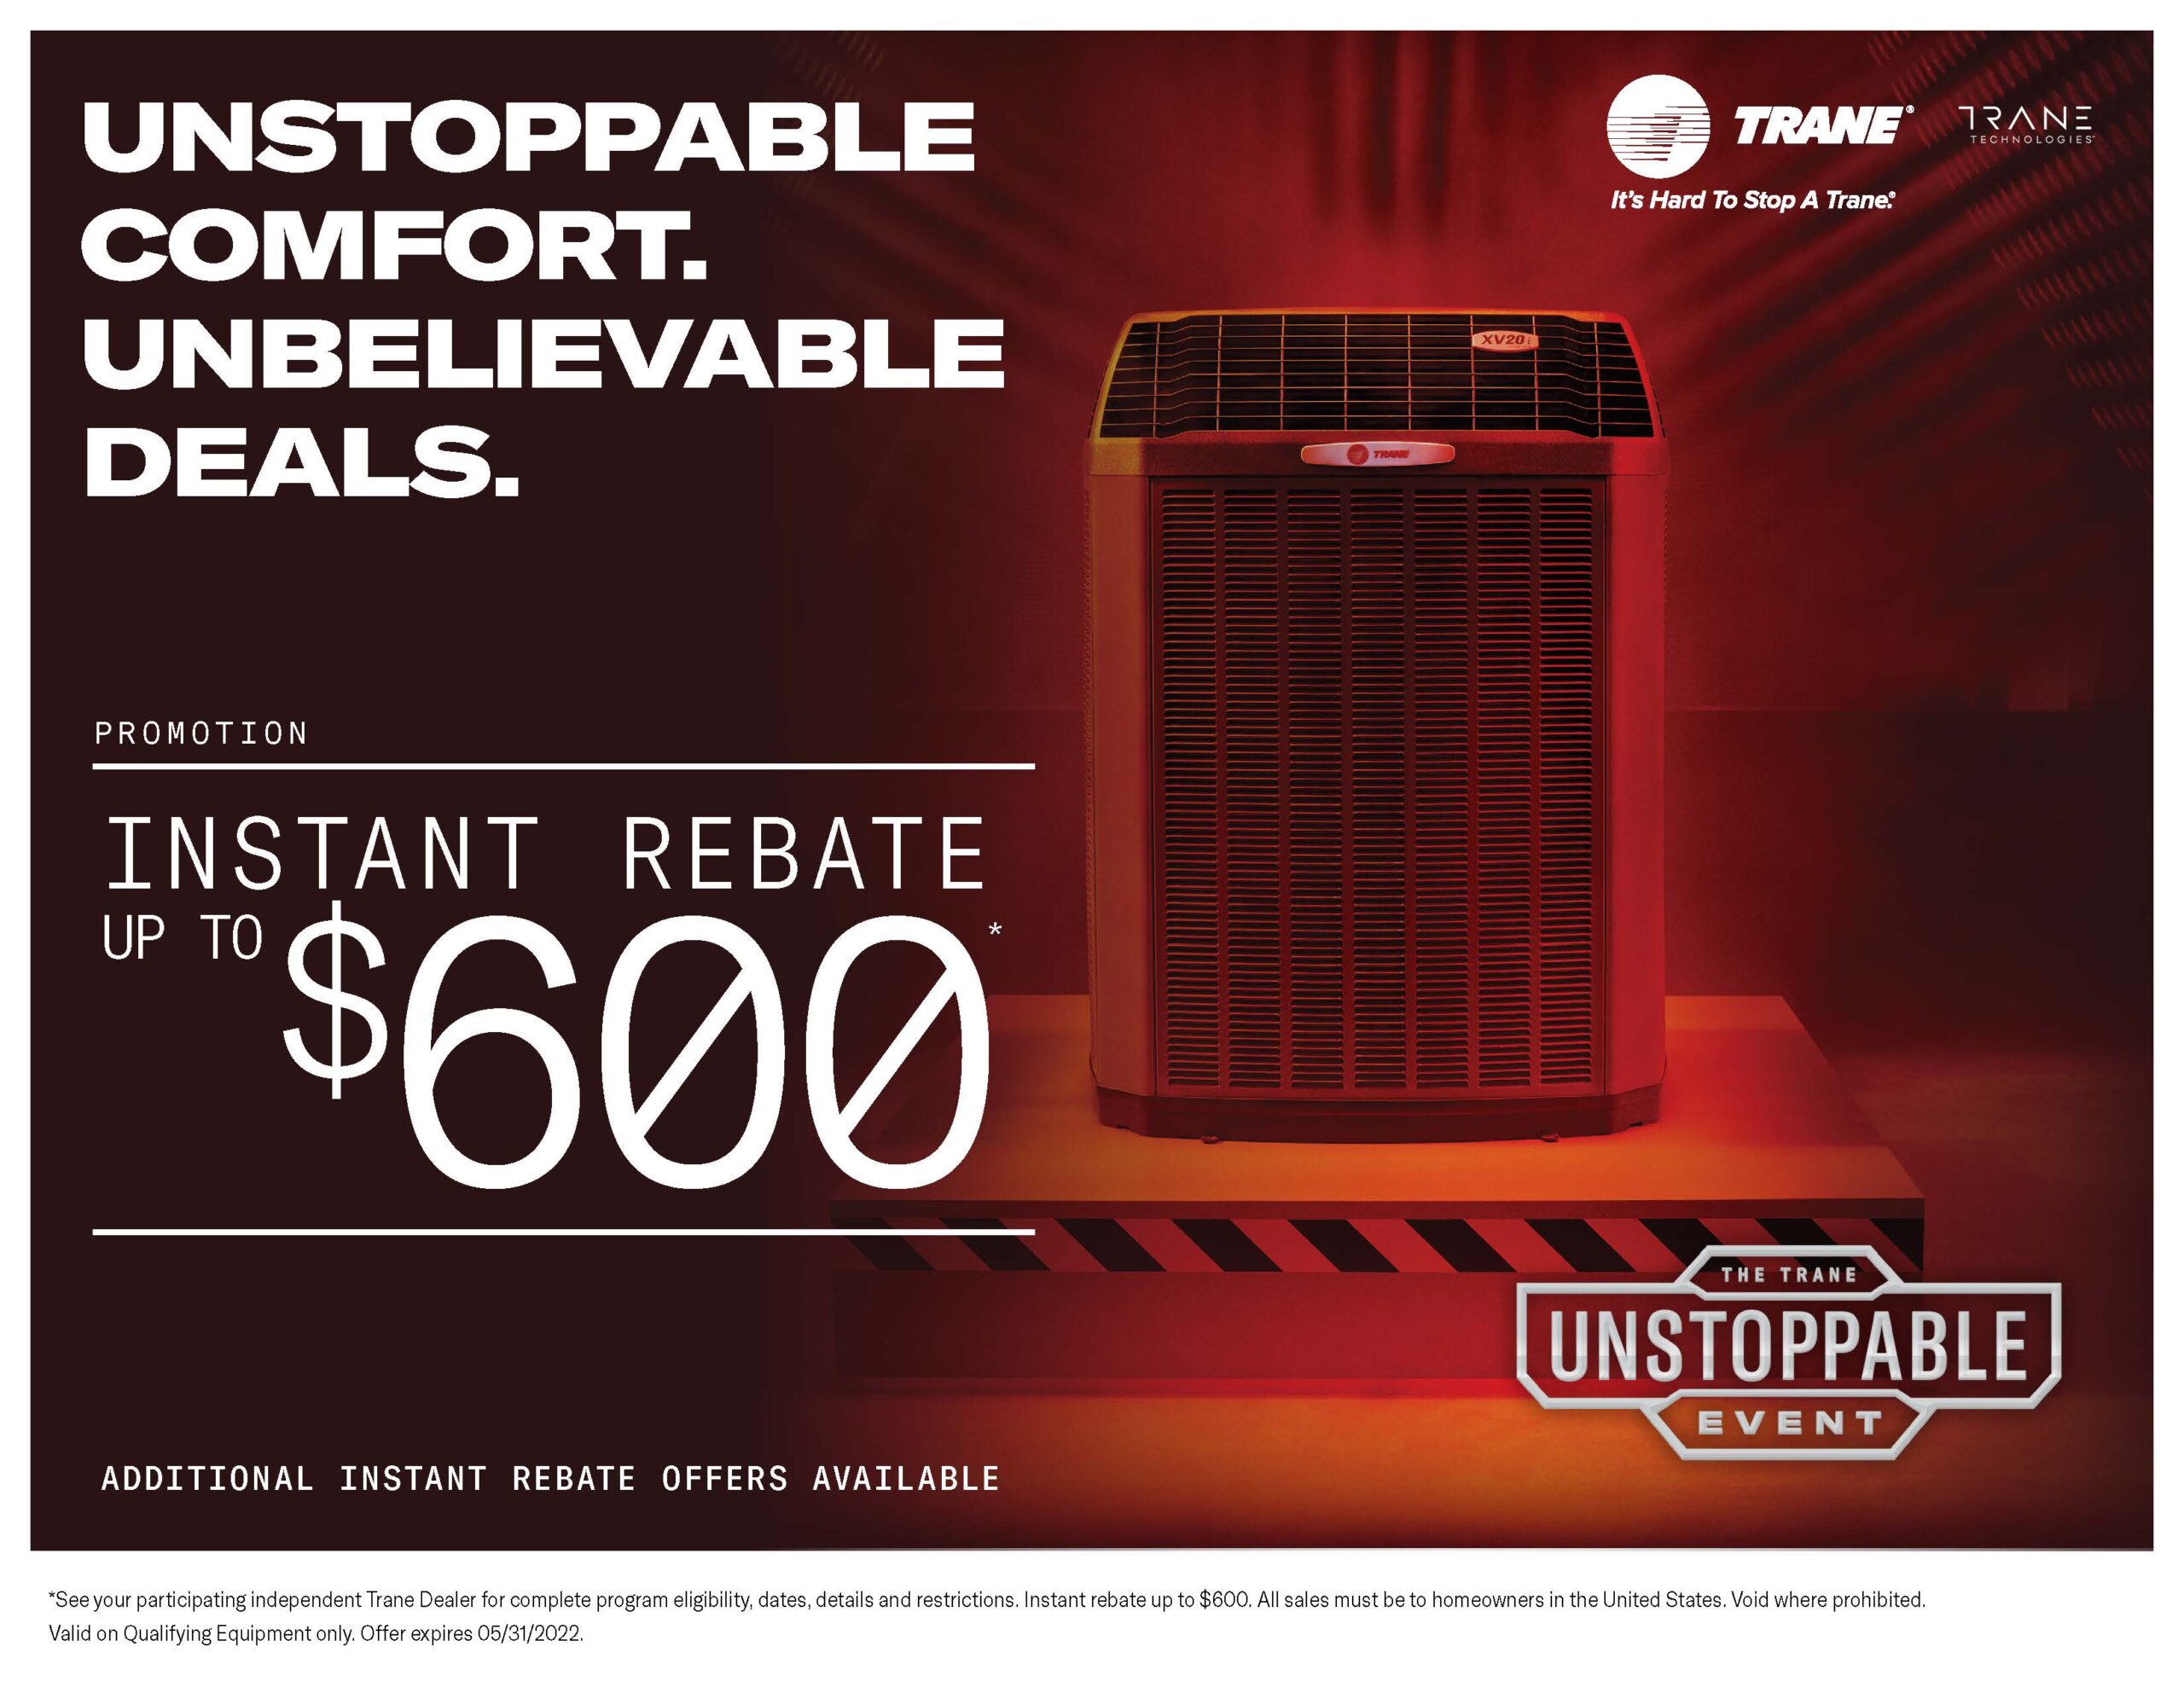 trane-unstoppable-event-spring-2022-rebates-deal-s-heating-air